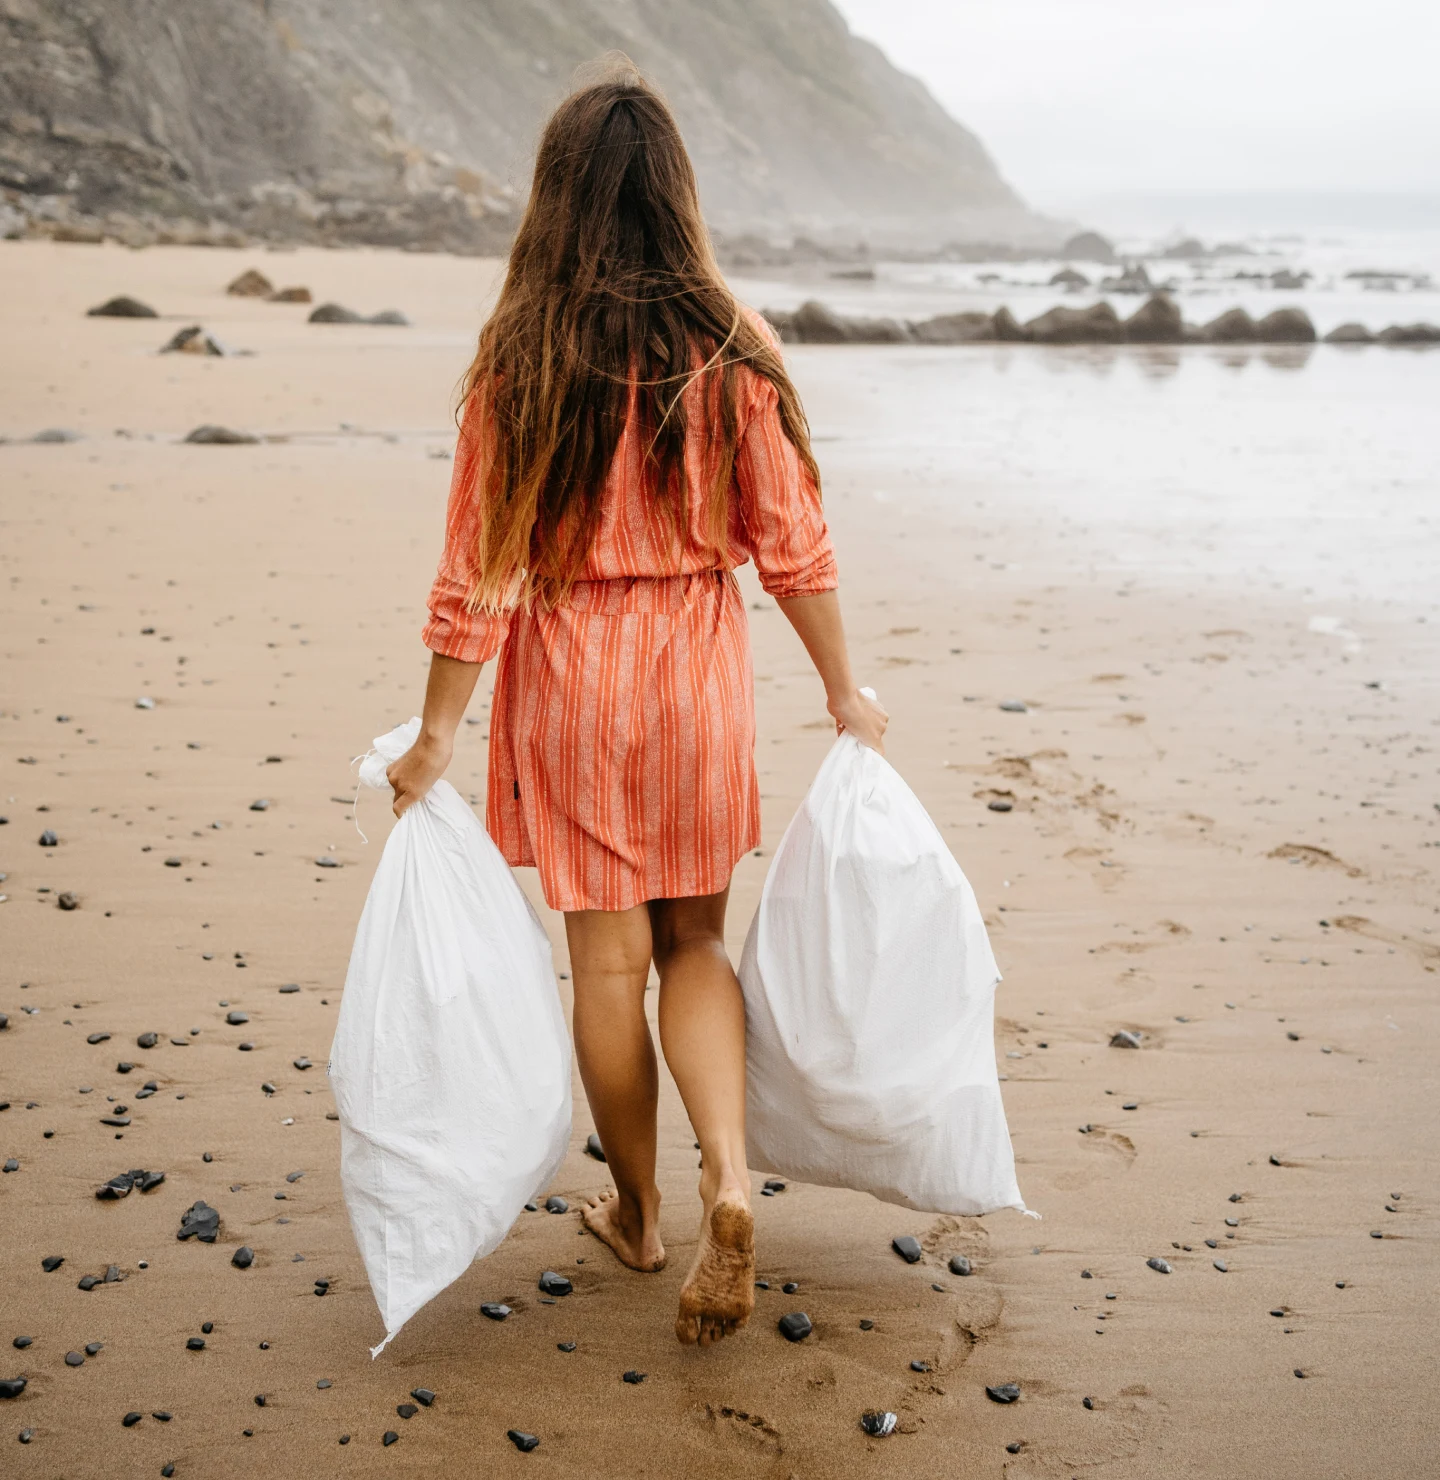 A woman in an orange dress walks barefoot on a secluded beach, carrying two, full white trash bags